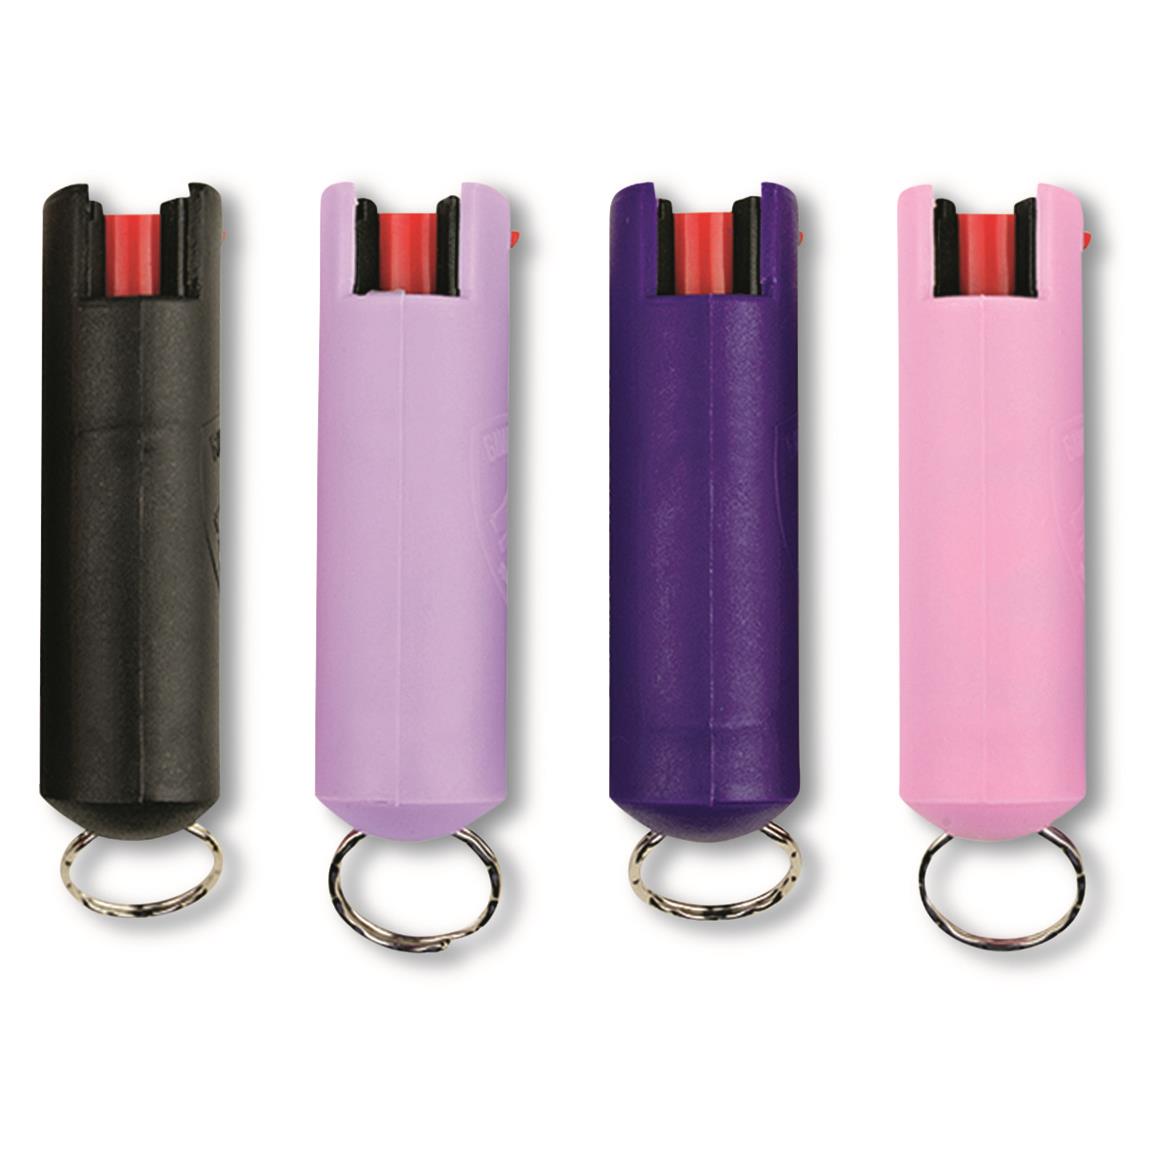 Guard Dog Security Quick Action Pepper Spray Key Chain, 4 Pack